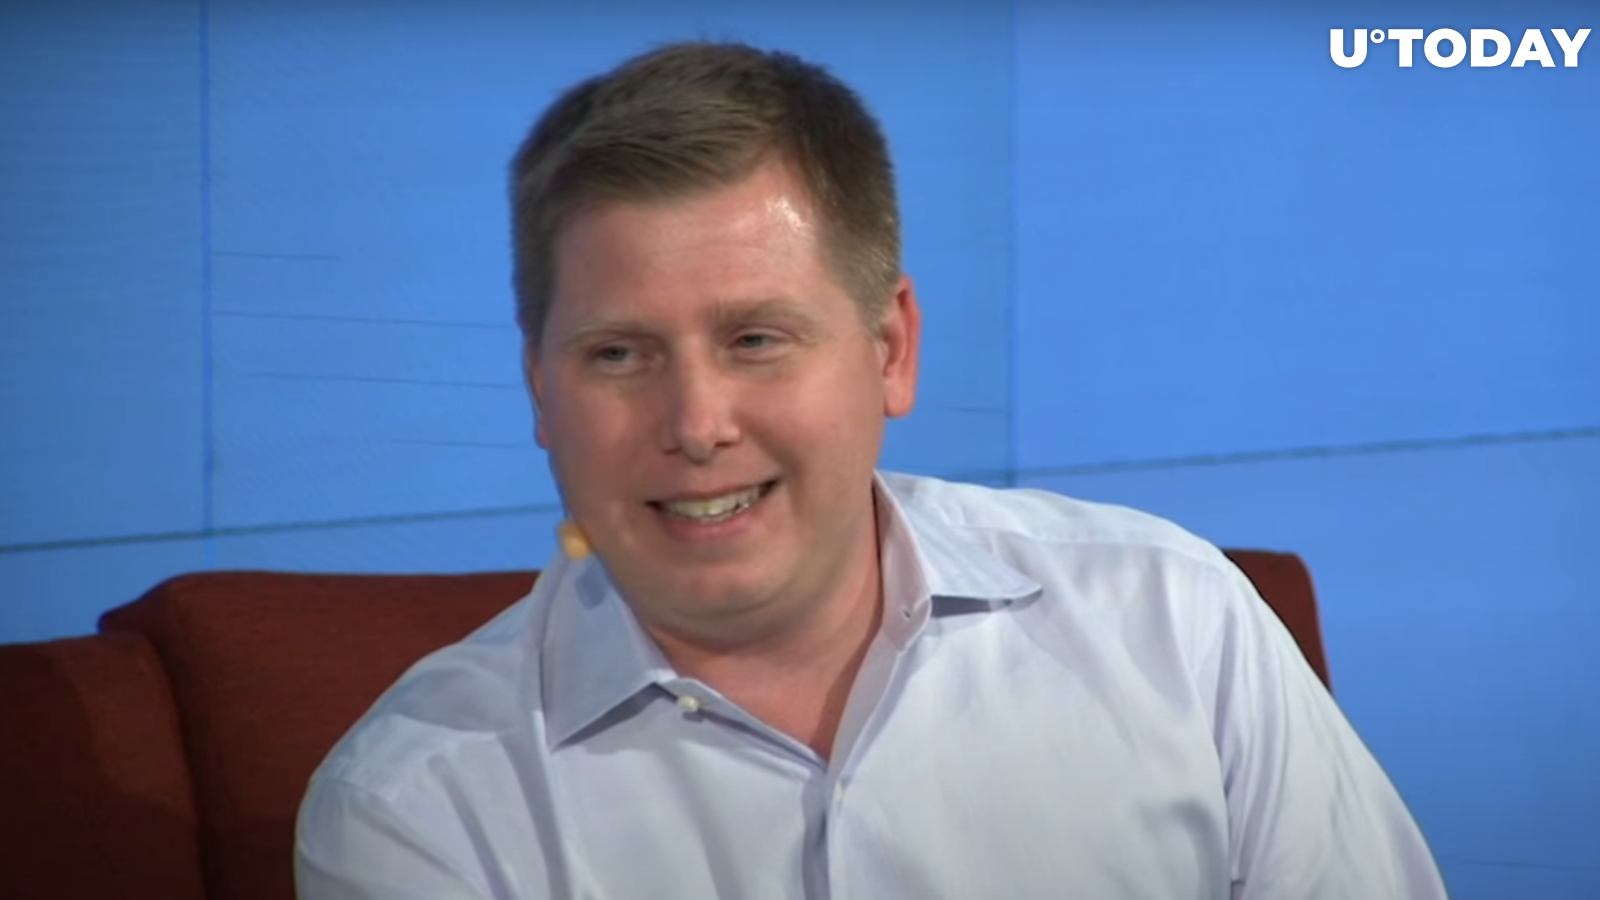 99 Percent of Cryptocurrencies Are Overpriced, Says Crypto King Barry Silbert